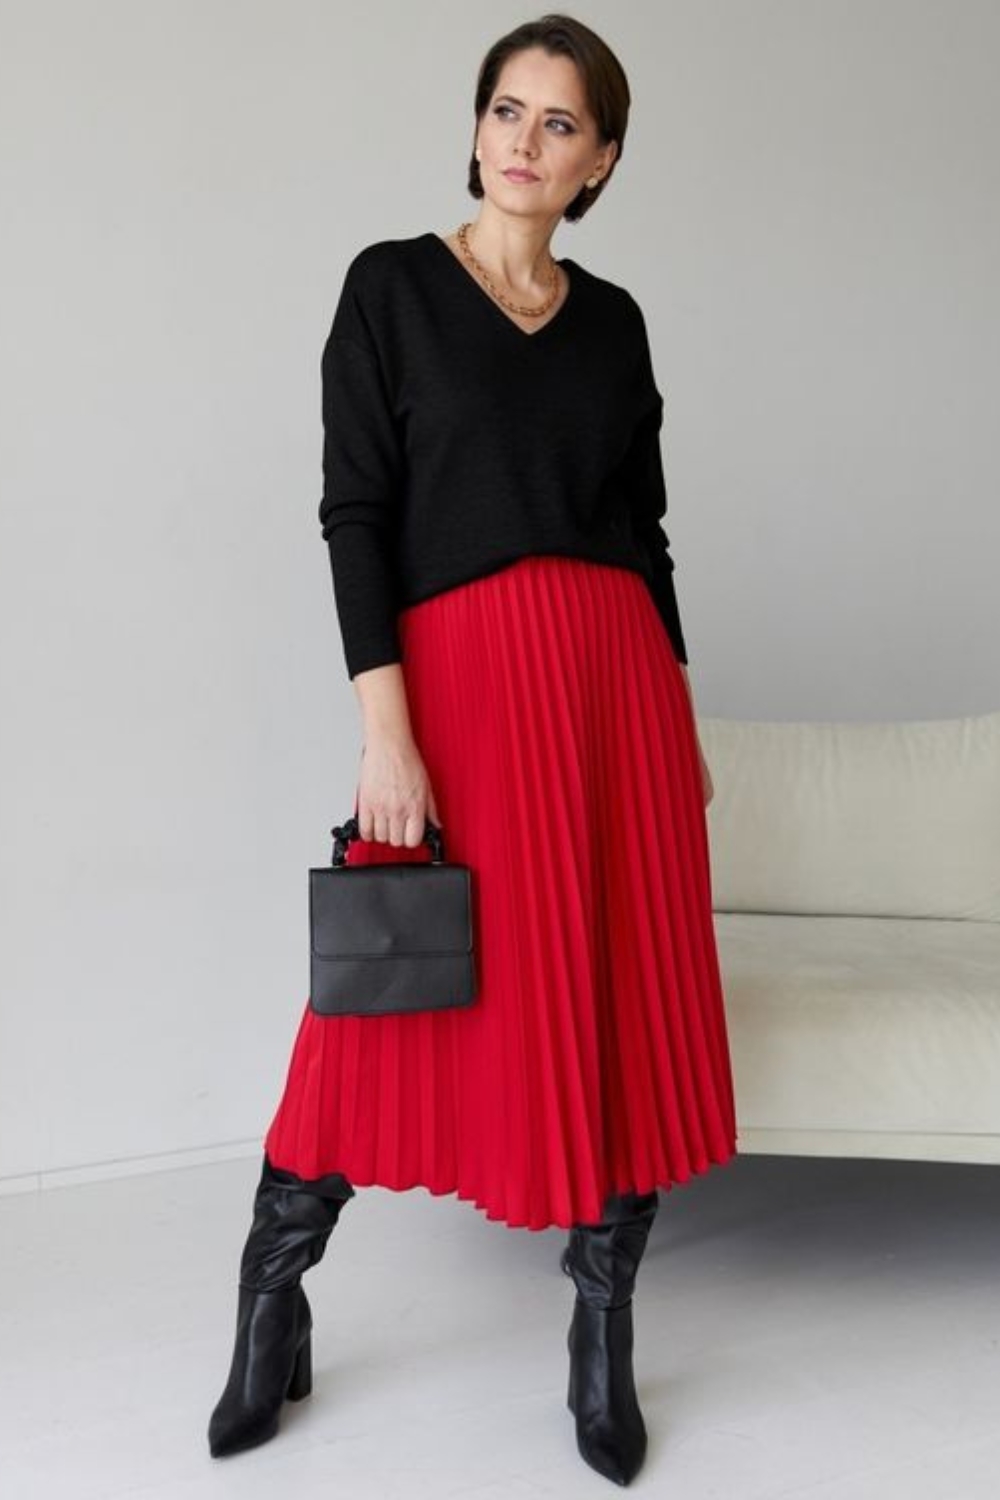 Black sweater with colored skirt